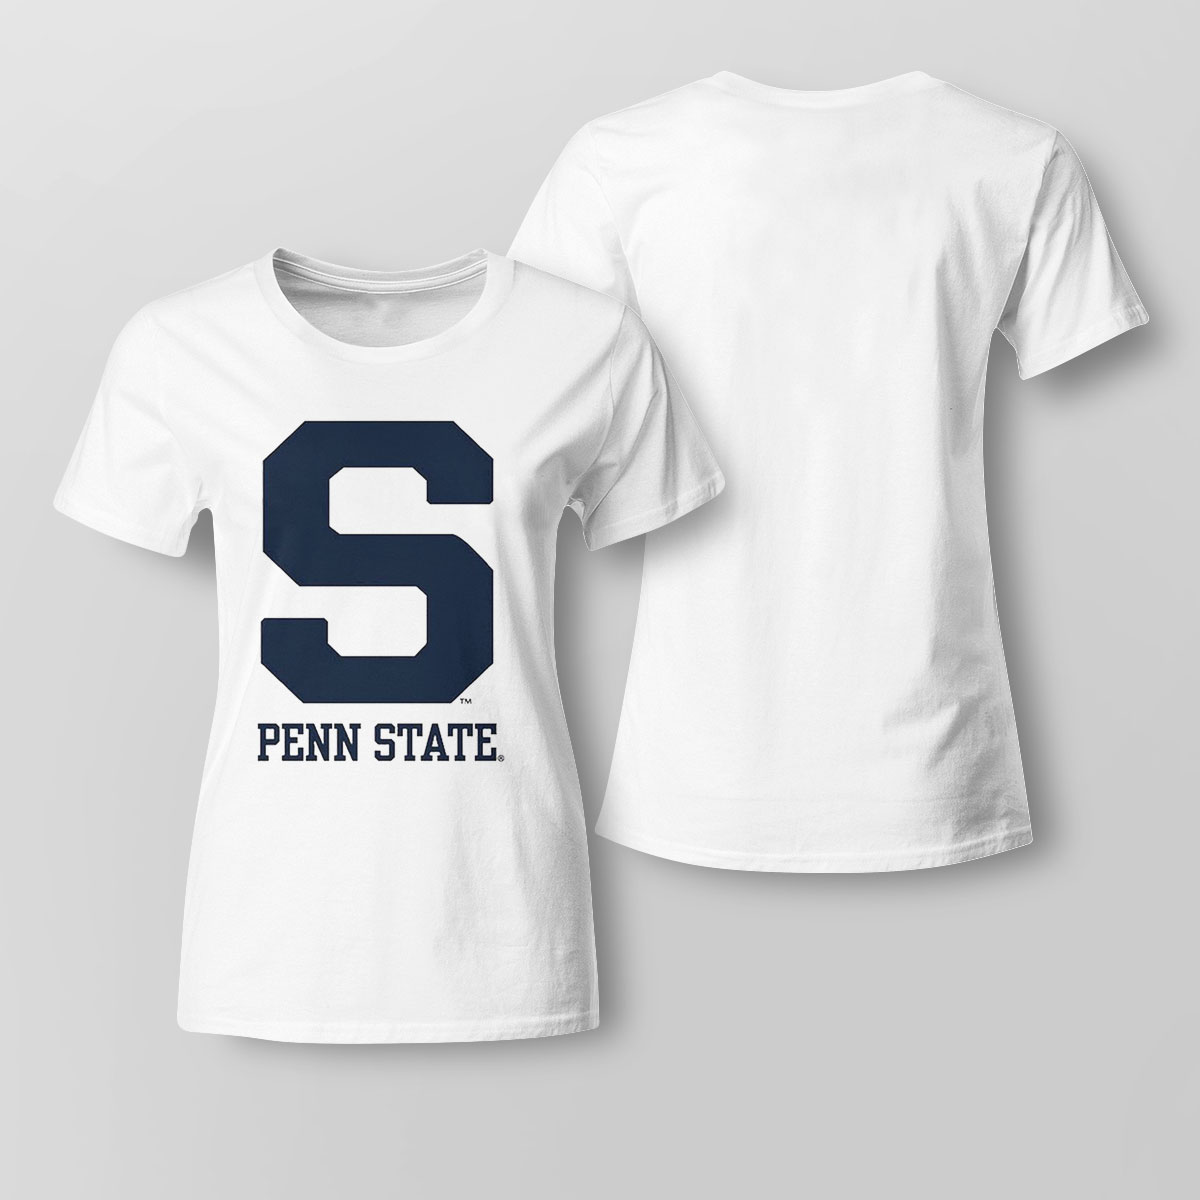 Penn State University Block S Embroidered Hoodie Shirt